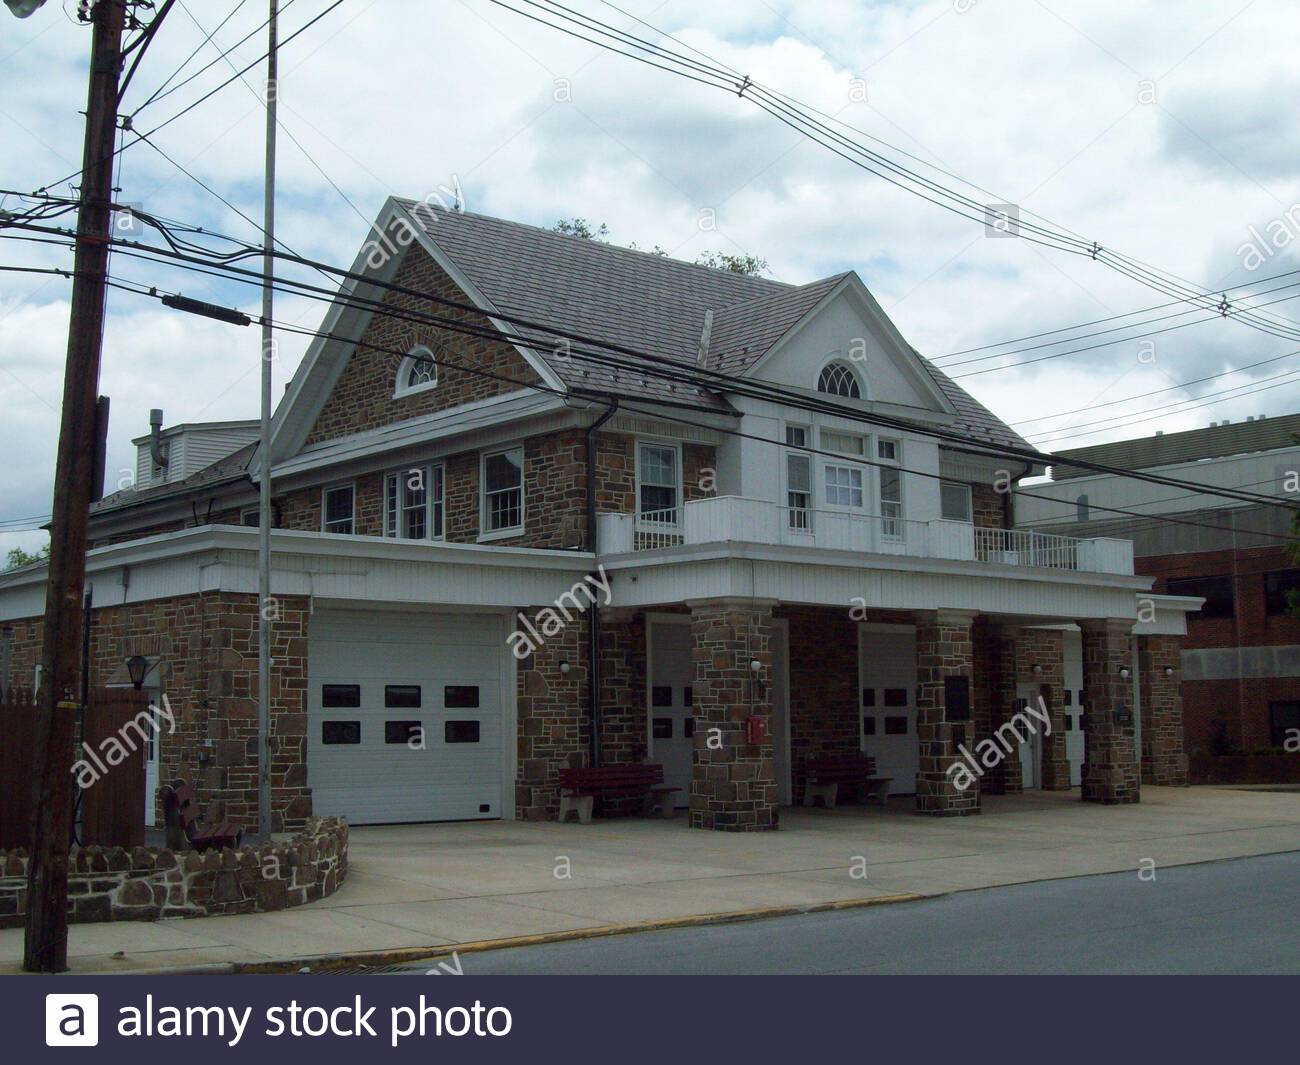 English: Aetna Hose, Hook and Ladder Company Fire Station No. 2 ...